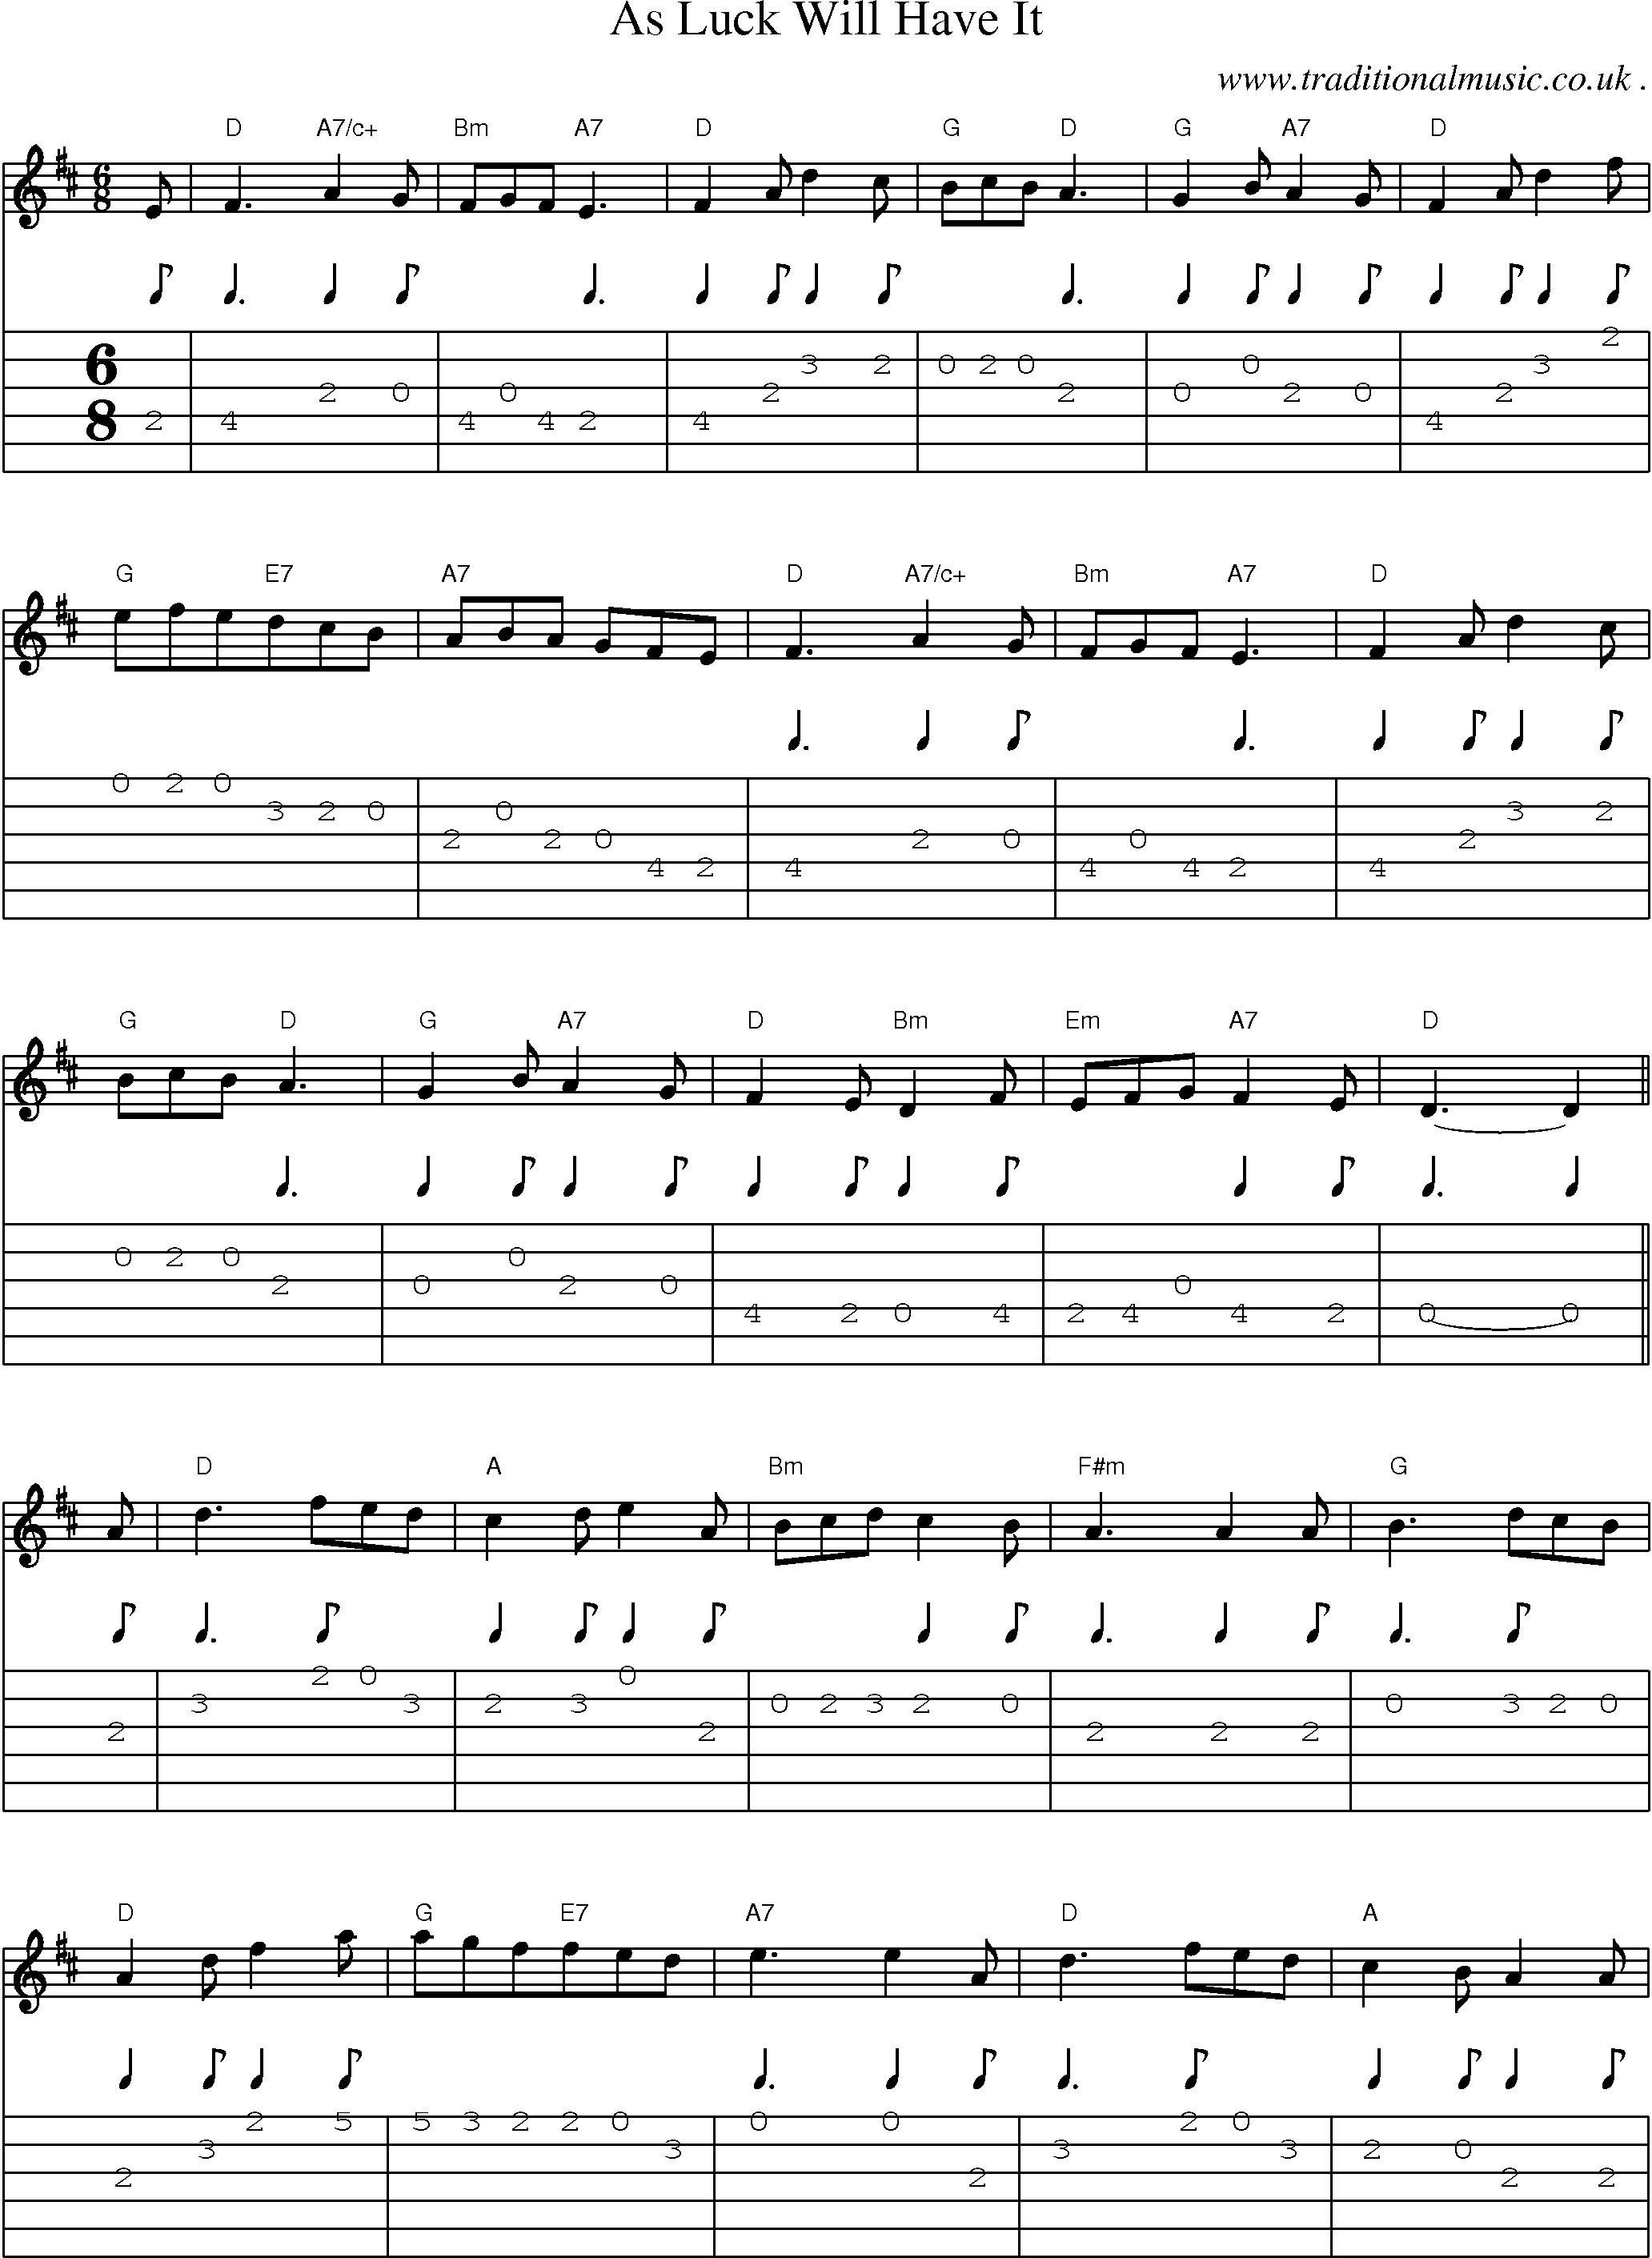 Sheet-Music and Guitar Tabs for As Luck Will Have It